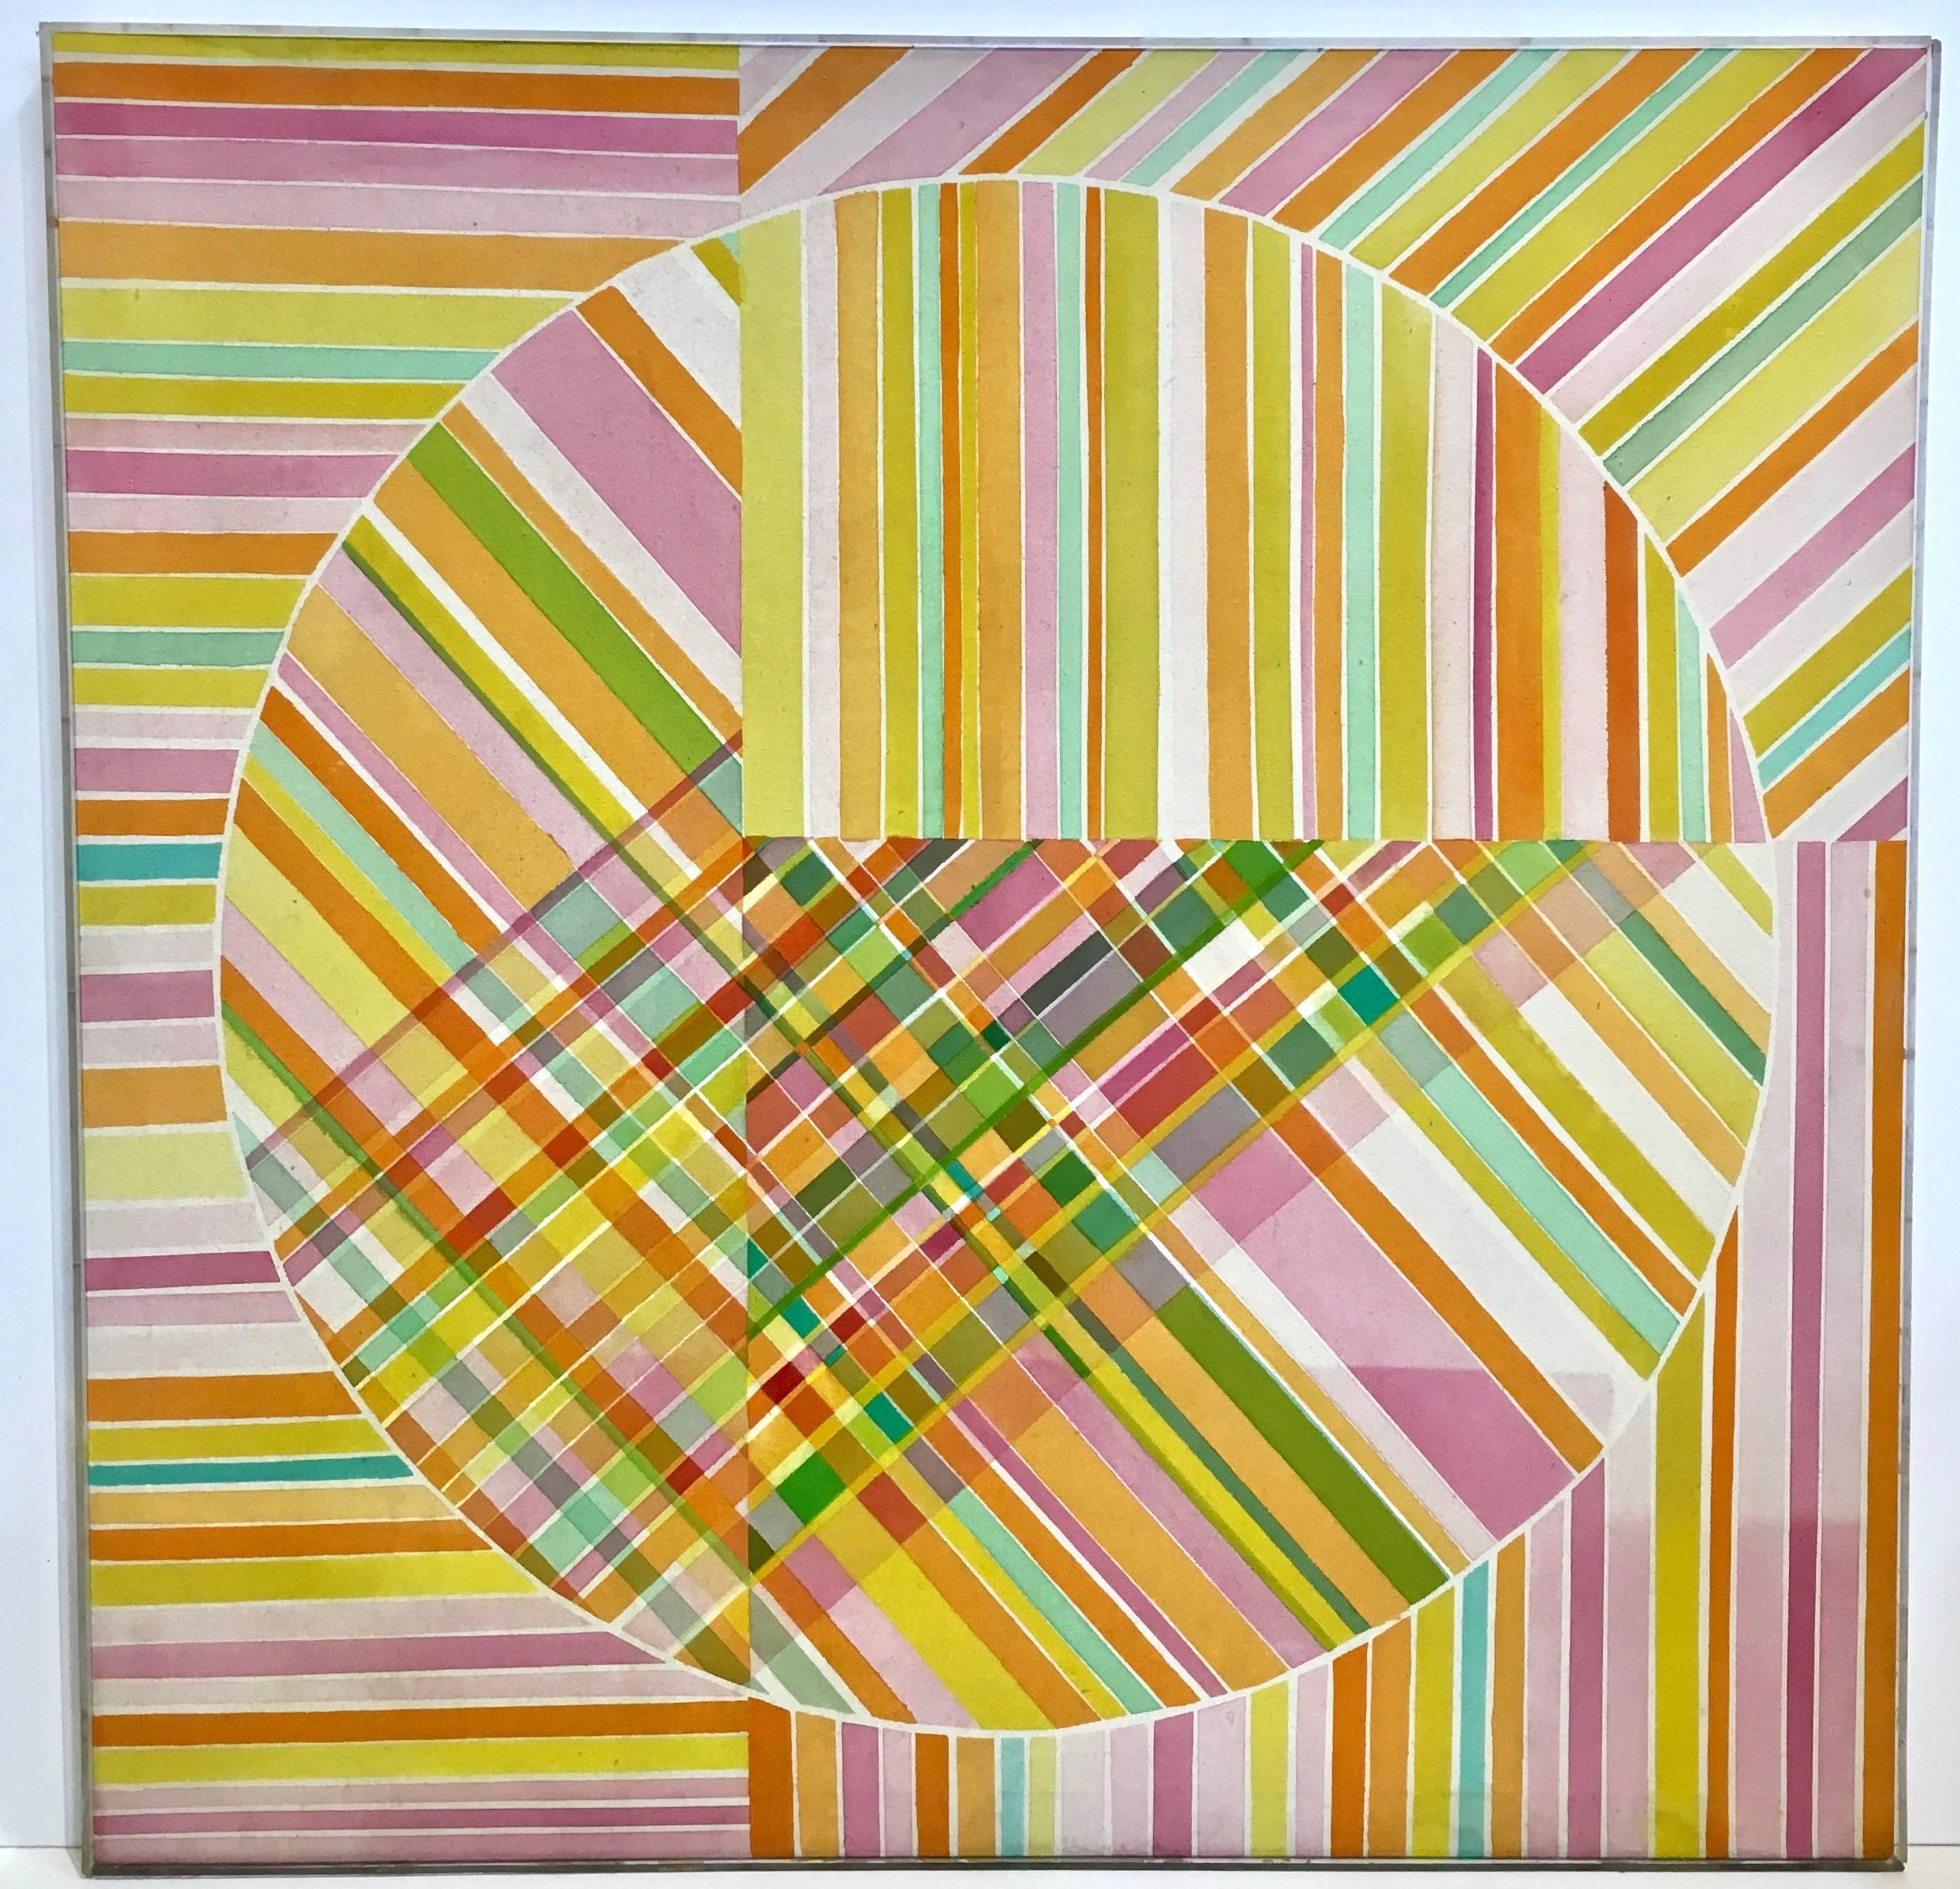 Large scaled midcentury Op Art acrylic painting by Mercedes Monez Smith, circa 1960s. Original Lucite lathe frame intact, with original exhibit label by the San Francisco Museum of Art. Fabulous display of hard edged lines intersecting in a playful